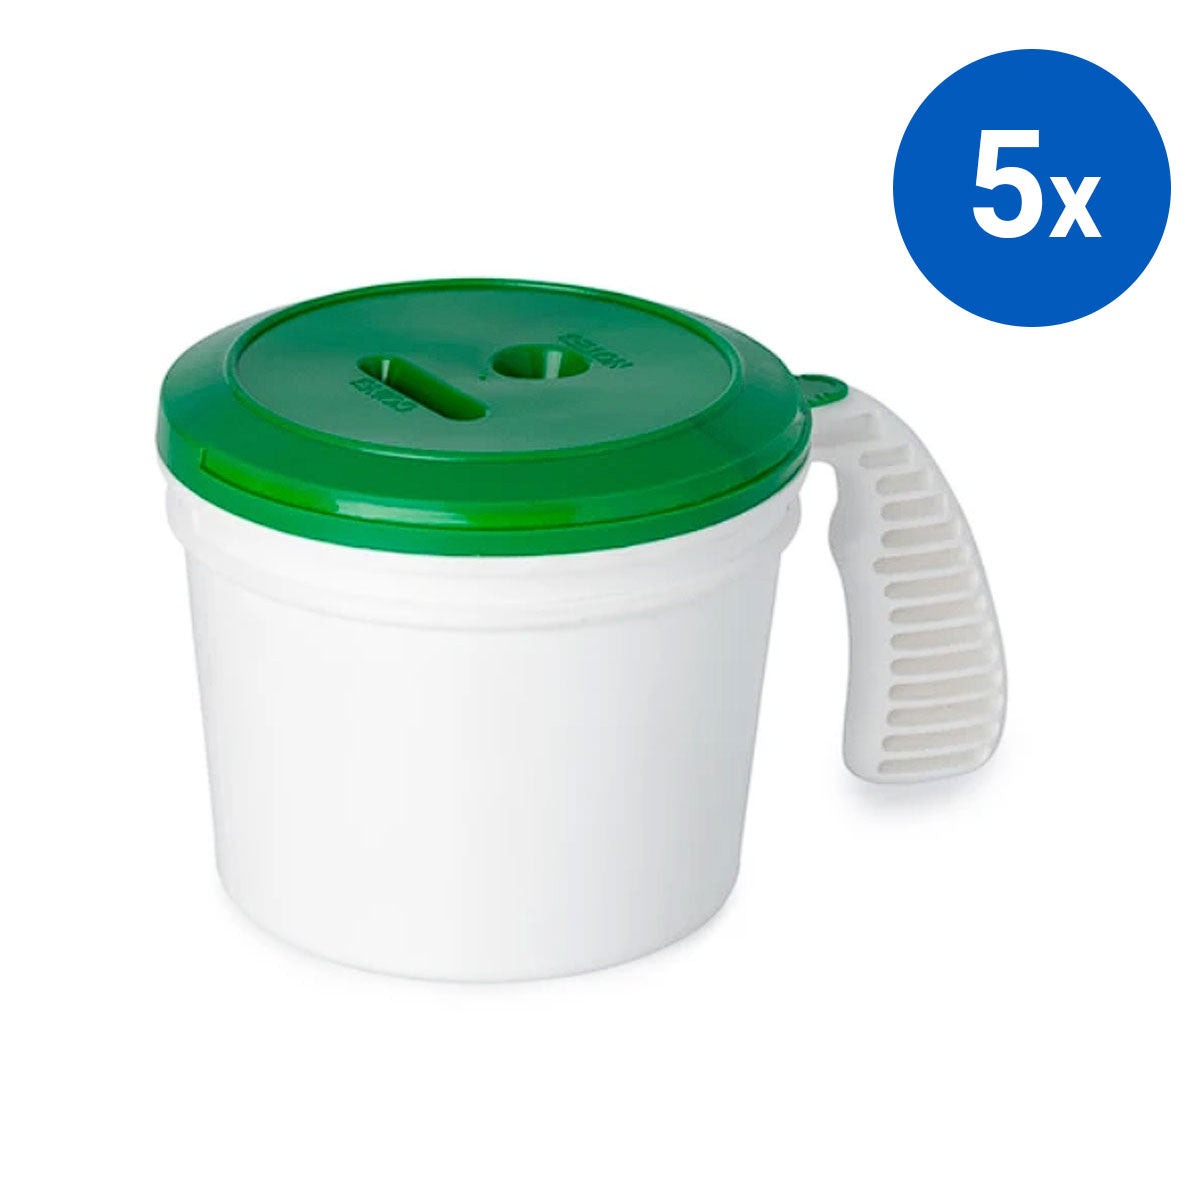 5x Collection Container Base and Standard Lid - Green